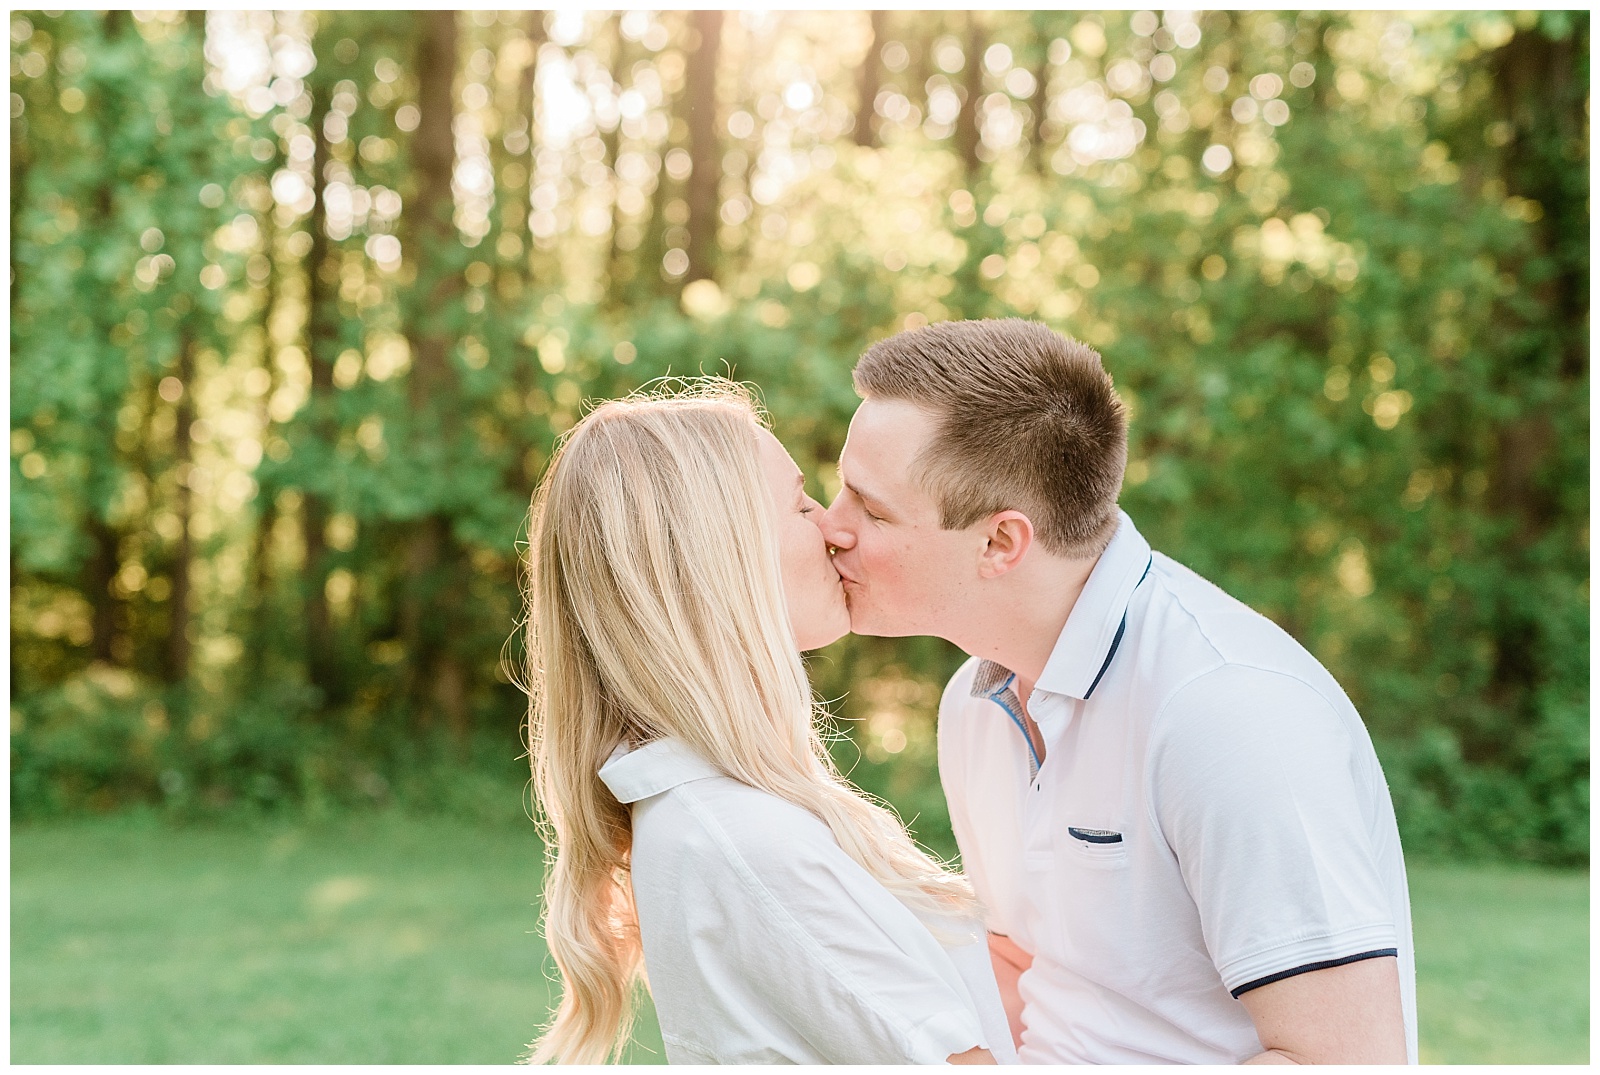 A couple kisses in front of a sunlit forest.